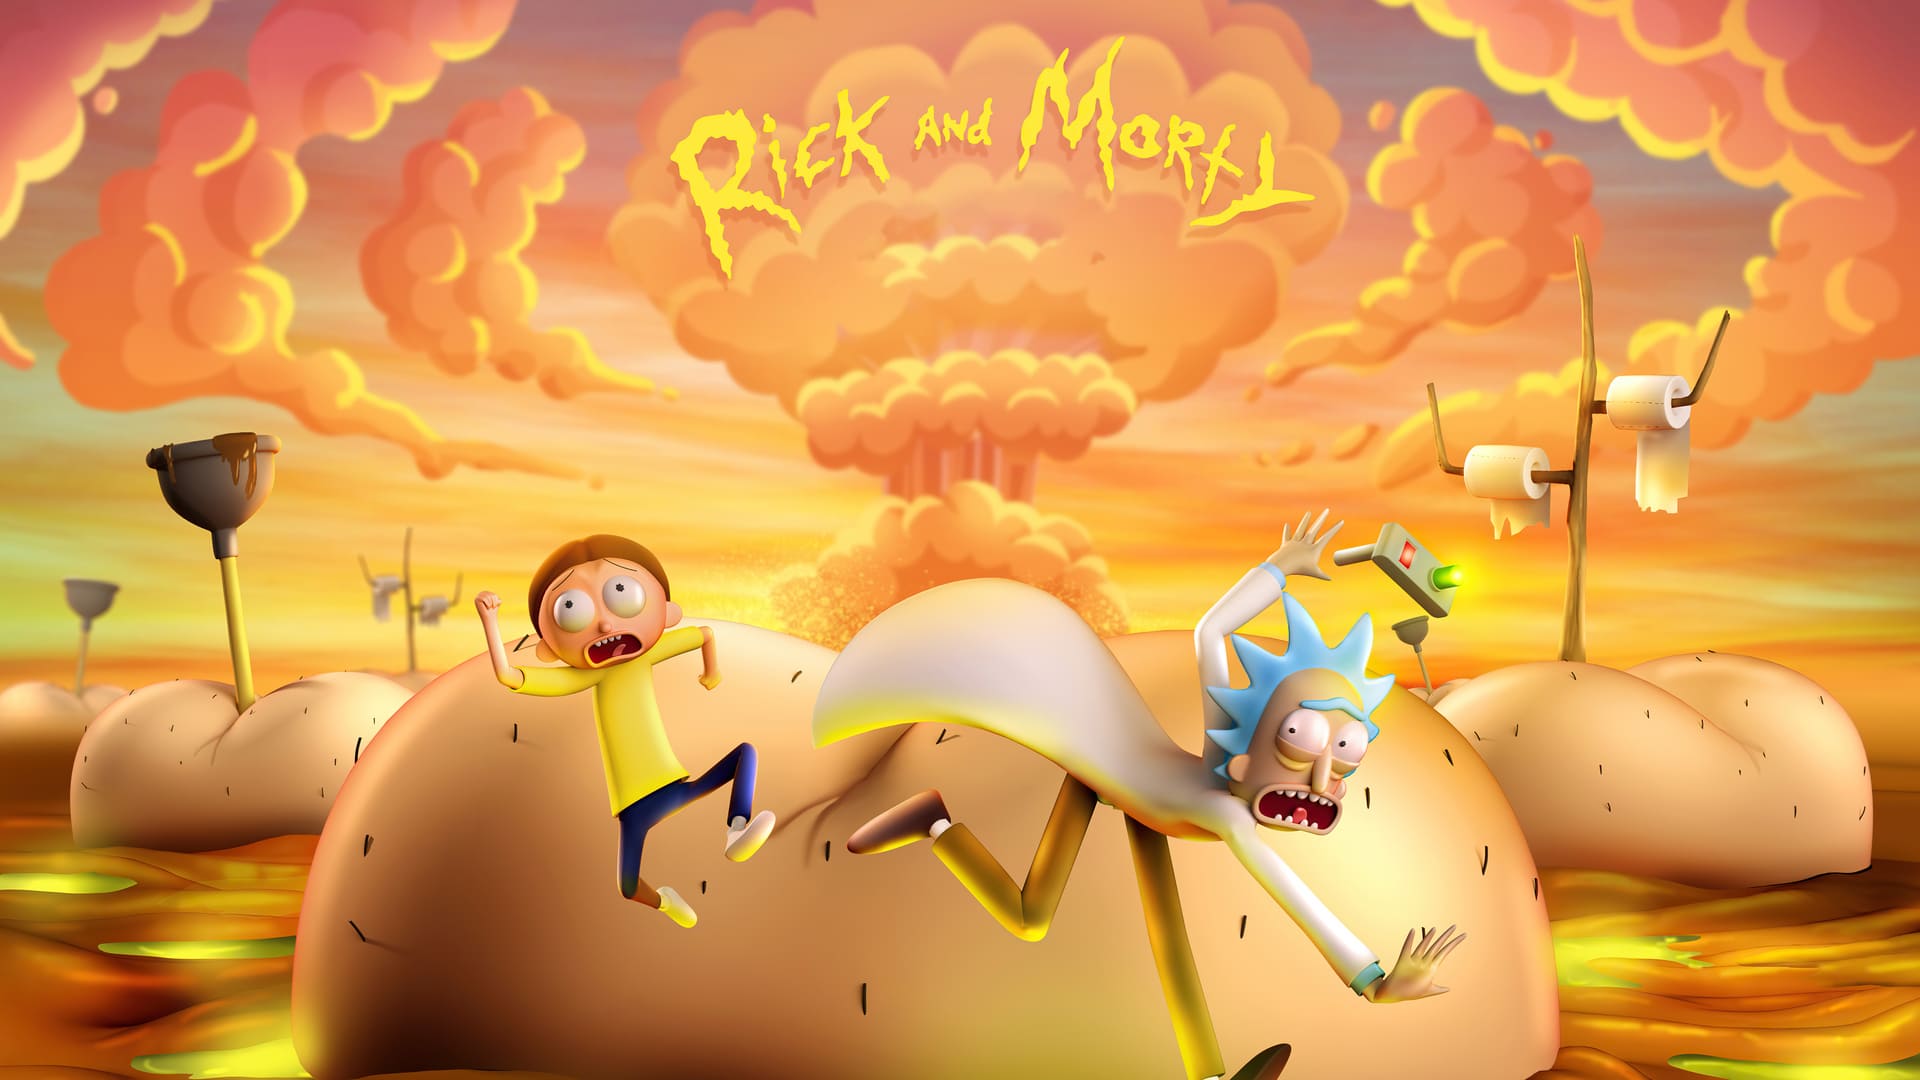 Rick and Morty Season 5 Wallpaper Rick and Morty S5 Background